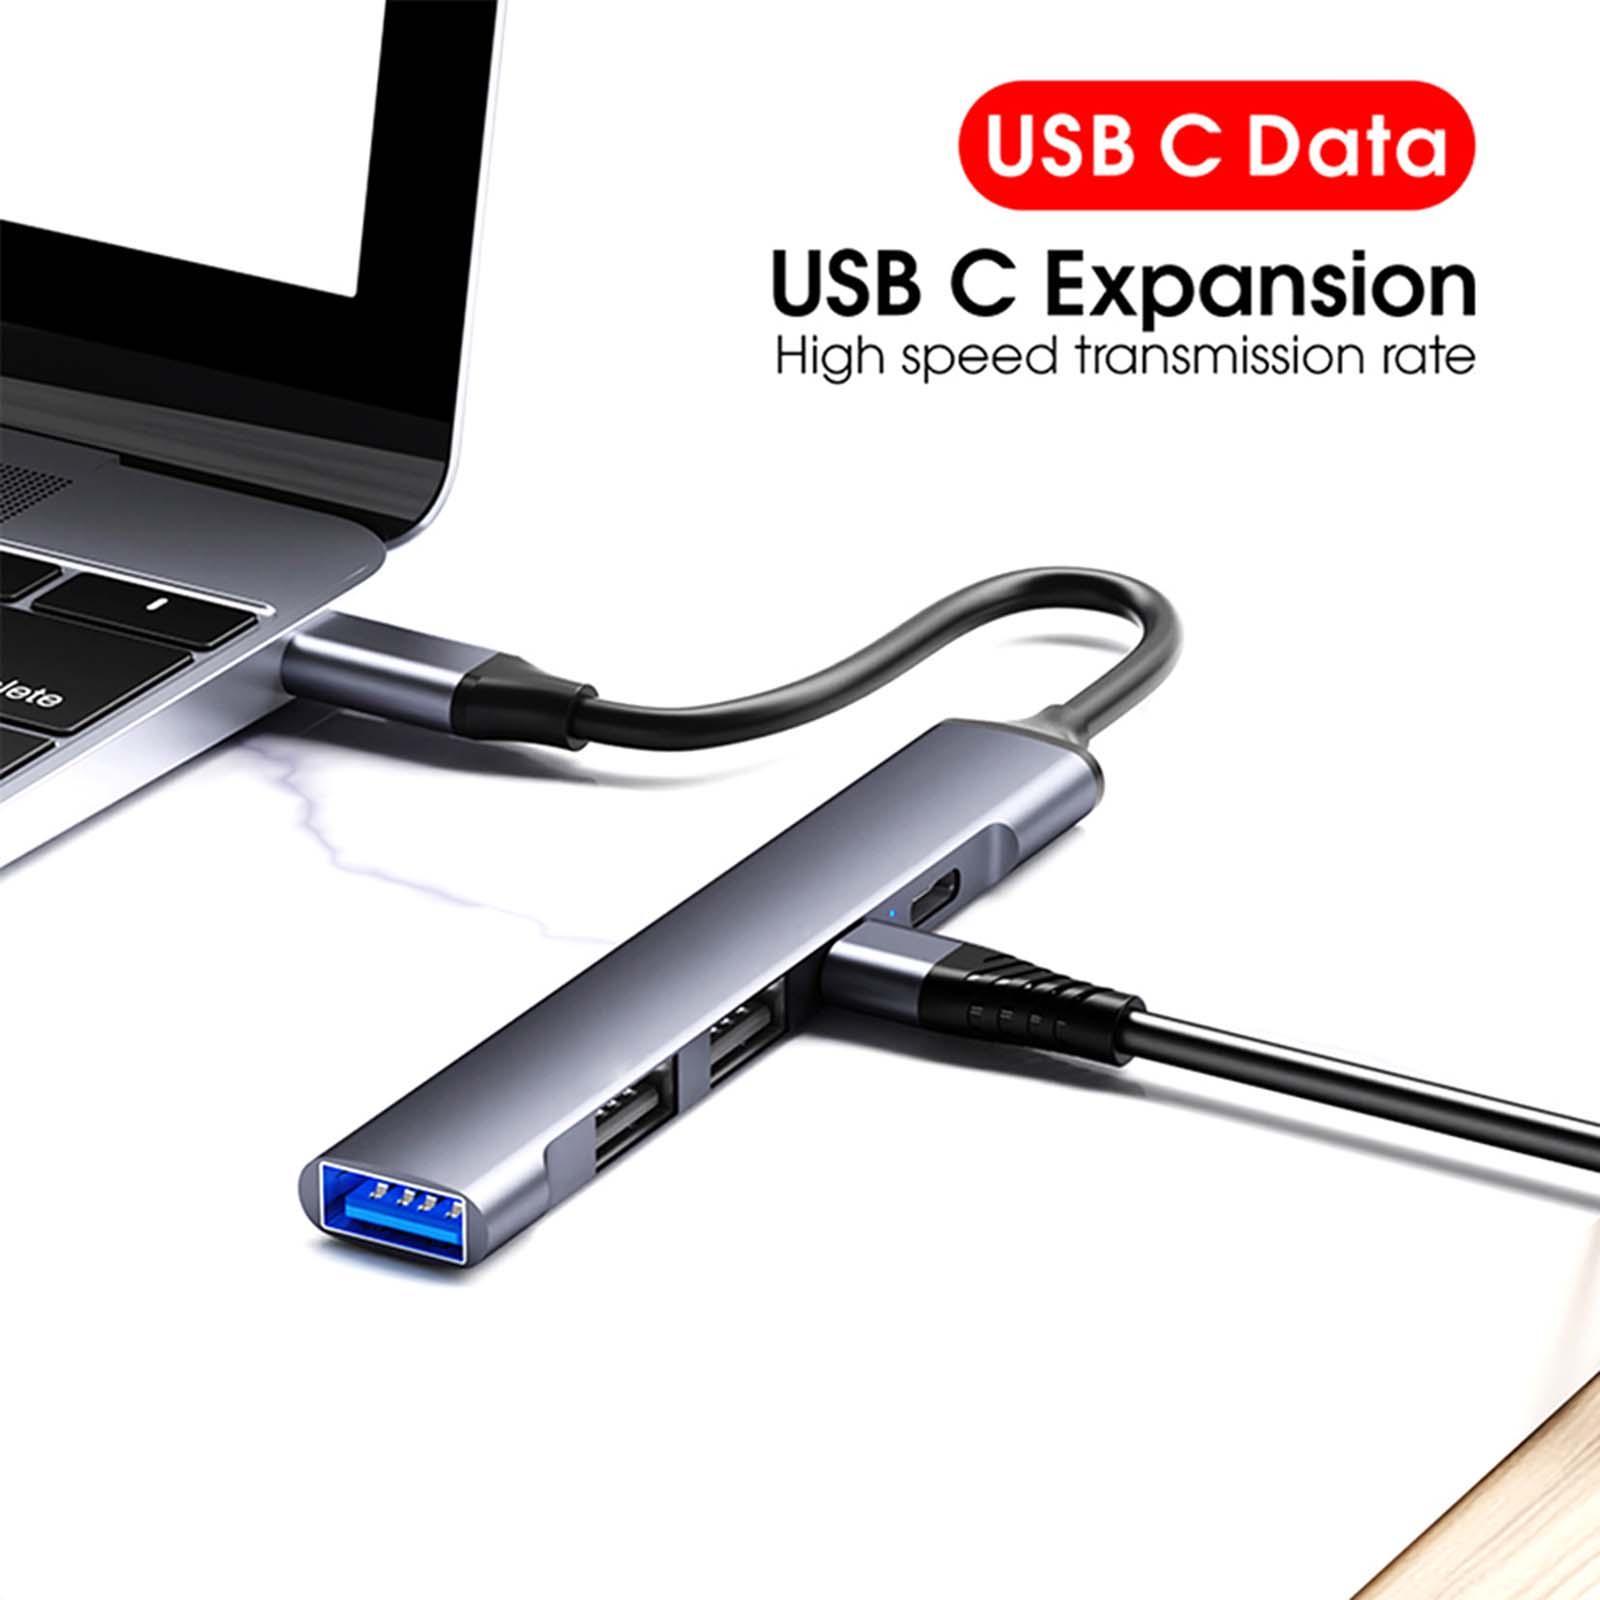 5 in 1 USB Type Hub, 1 USB 3.0 5Gbps Data Transfer PD Fast Charging 2 USB2.0 Ports Compact Splitter Docking Station, for Type C Devices.